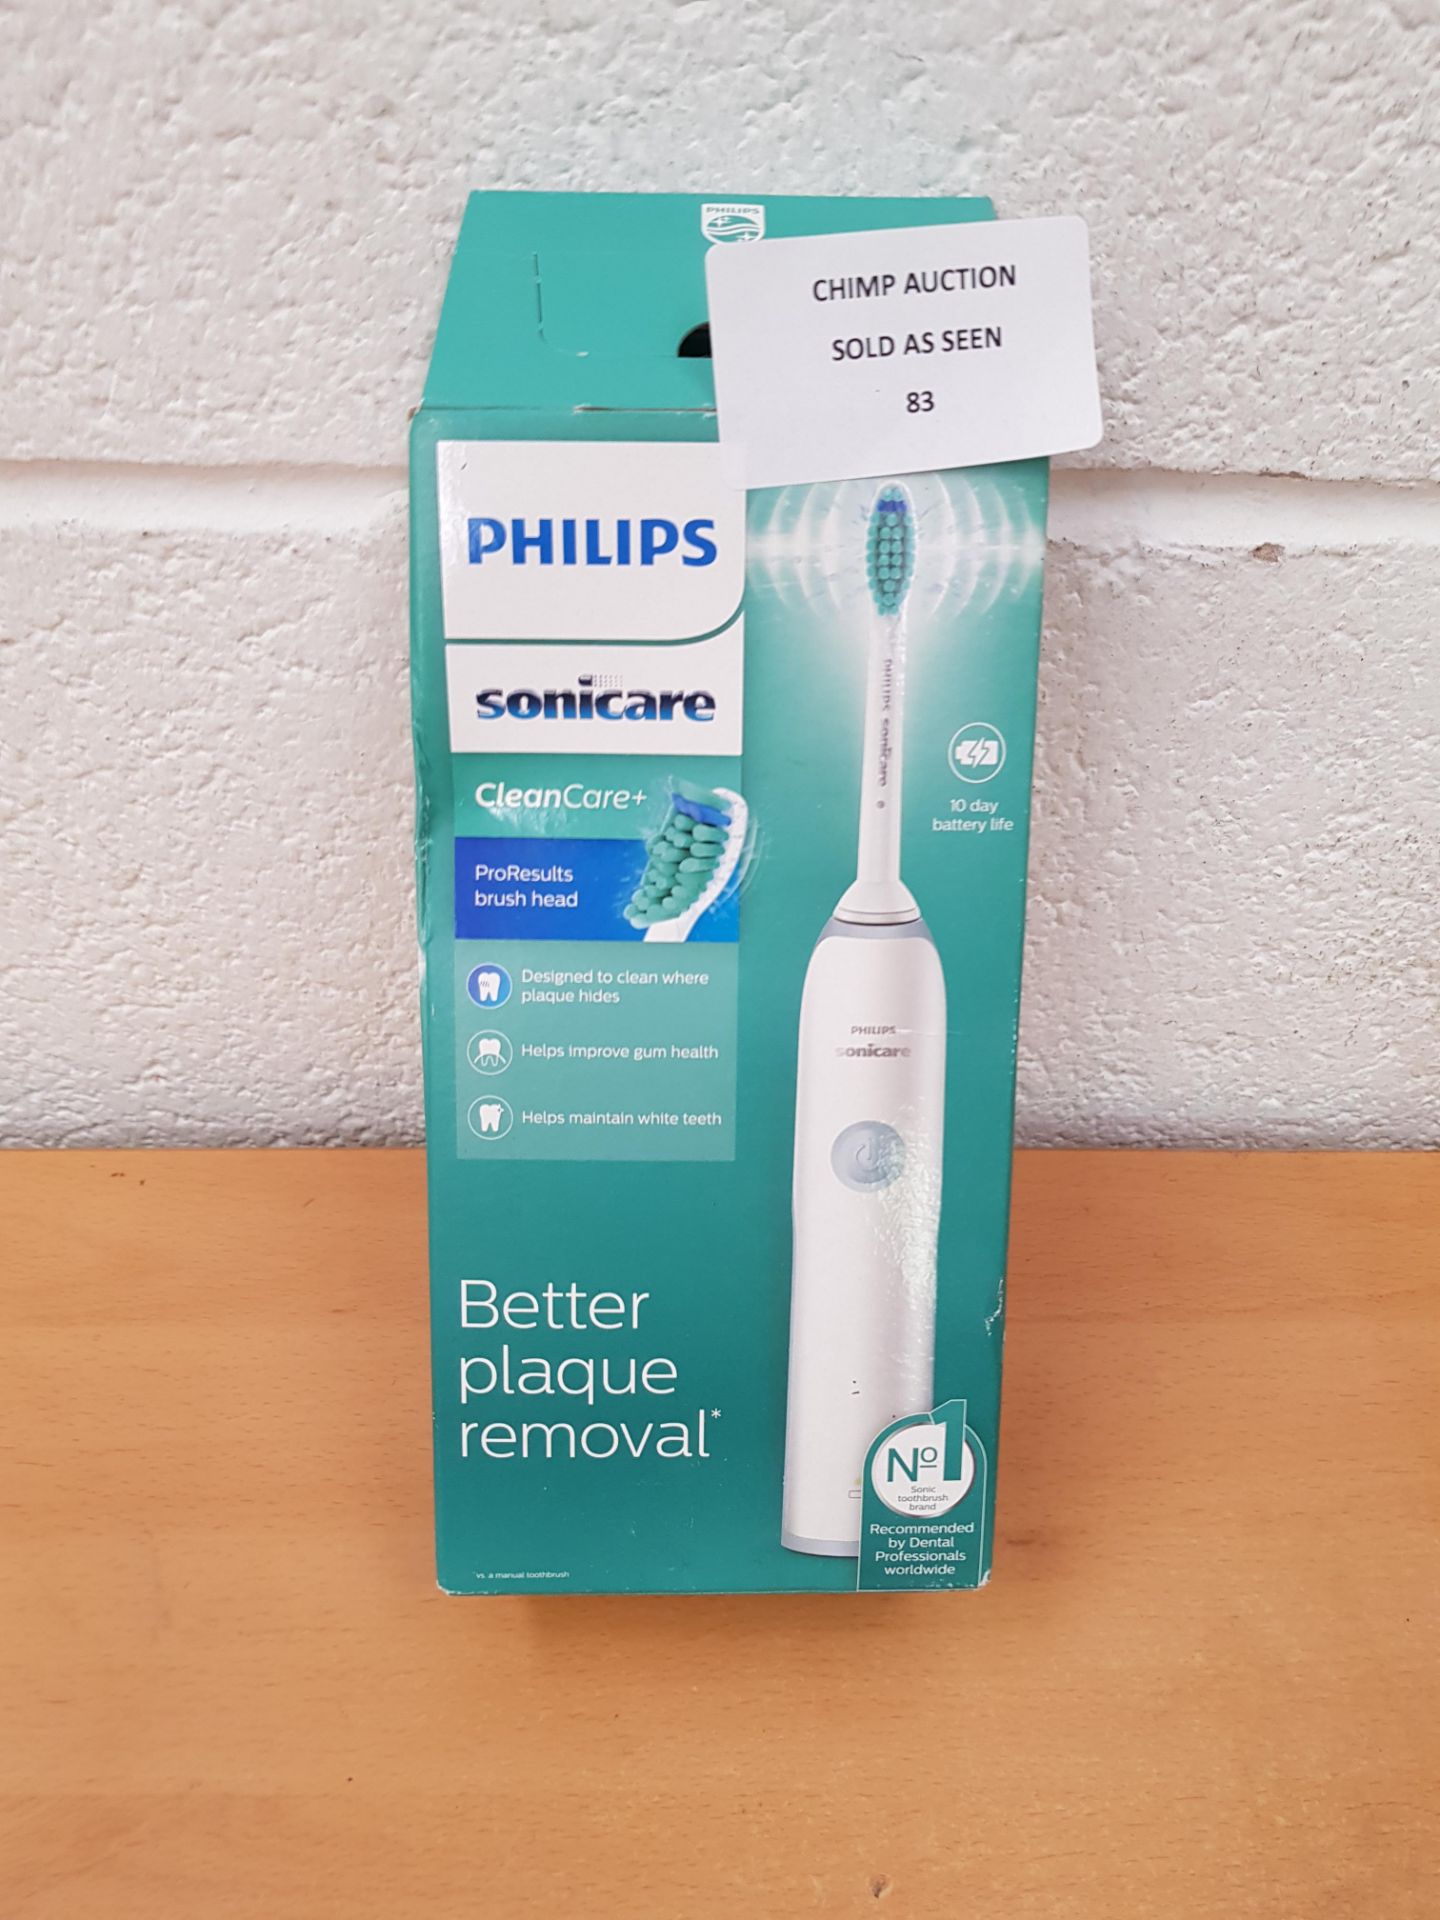 Philips Sonicare CleanCare+ Electric Toothbrush HX3214/01